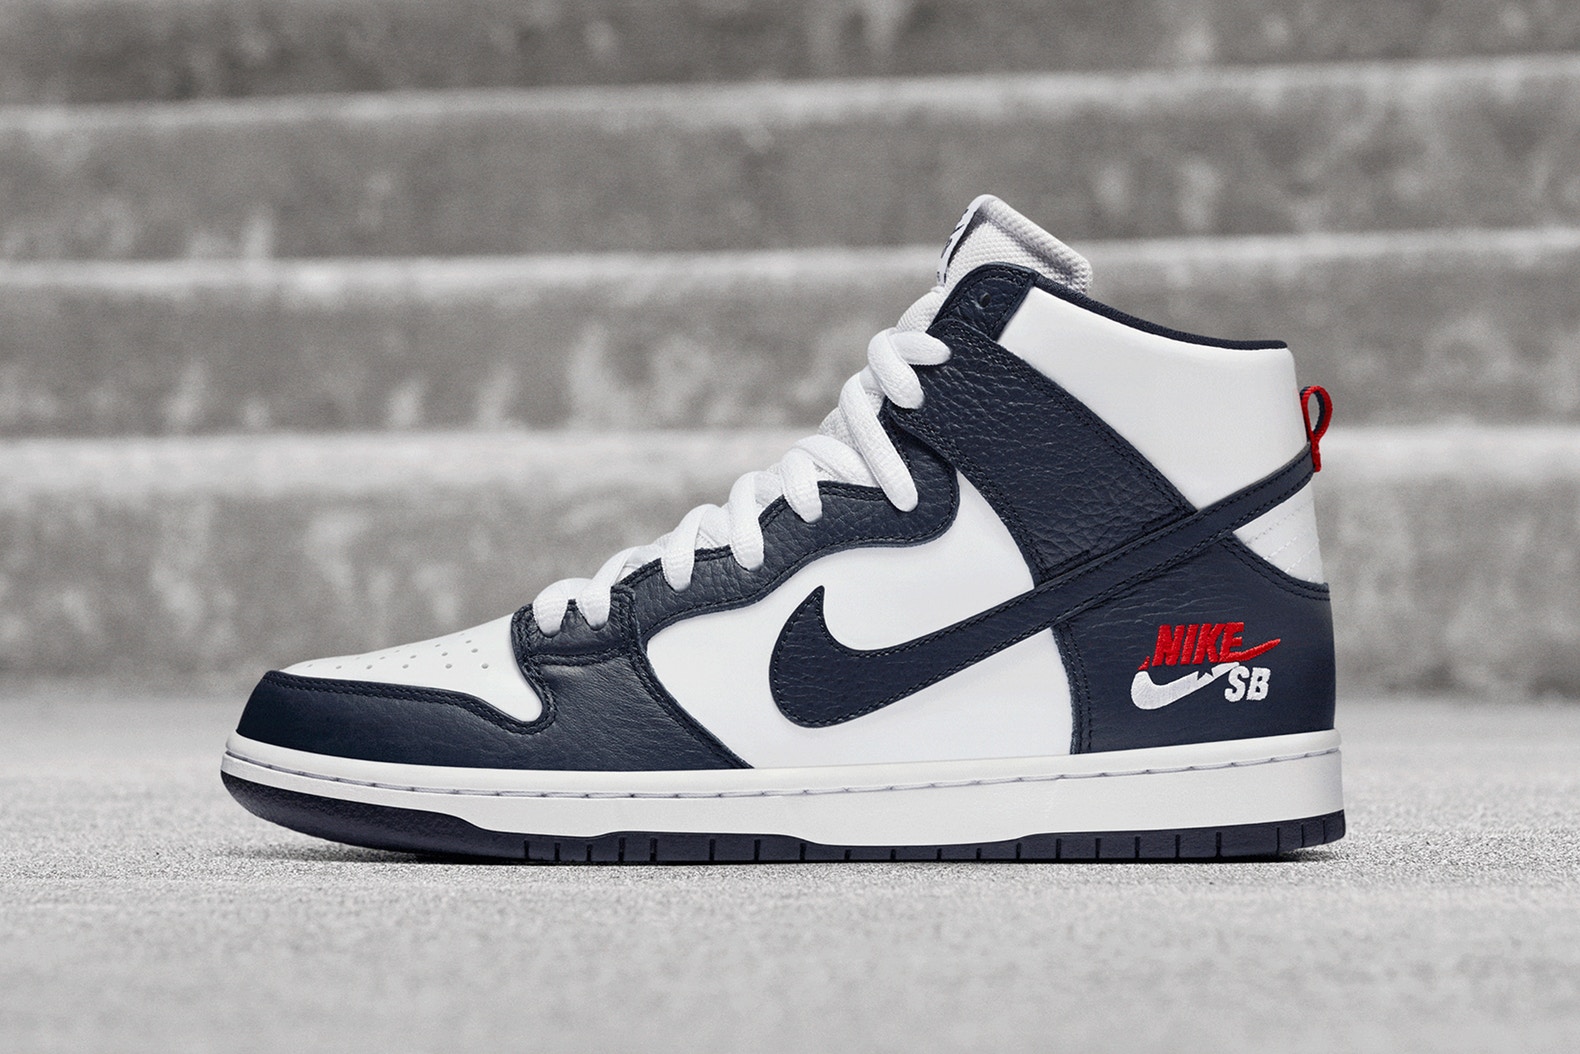 The Nike Sb Dunk High Pro Dream Team Takes It Back To 1992